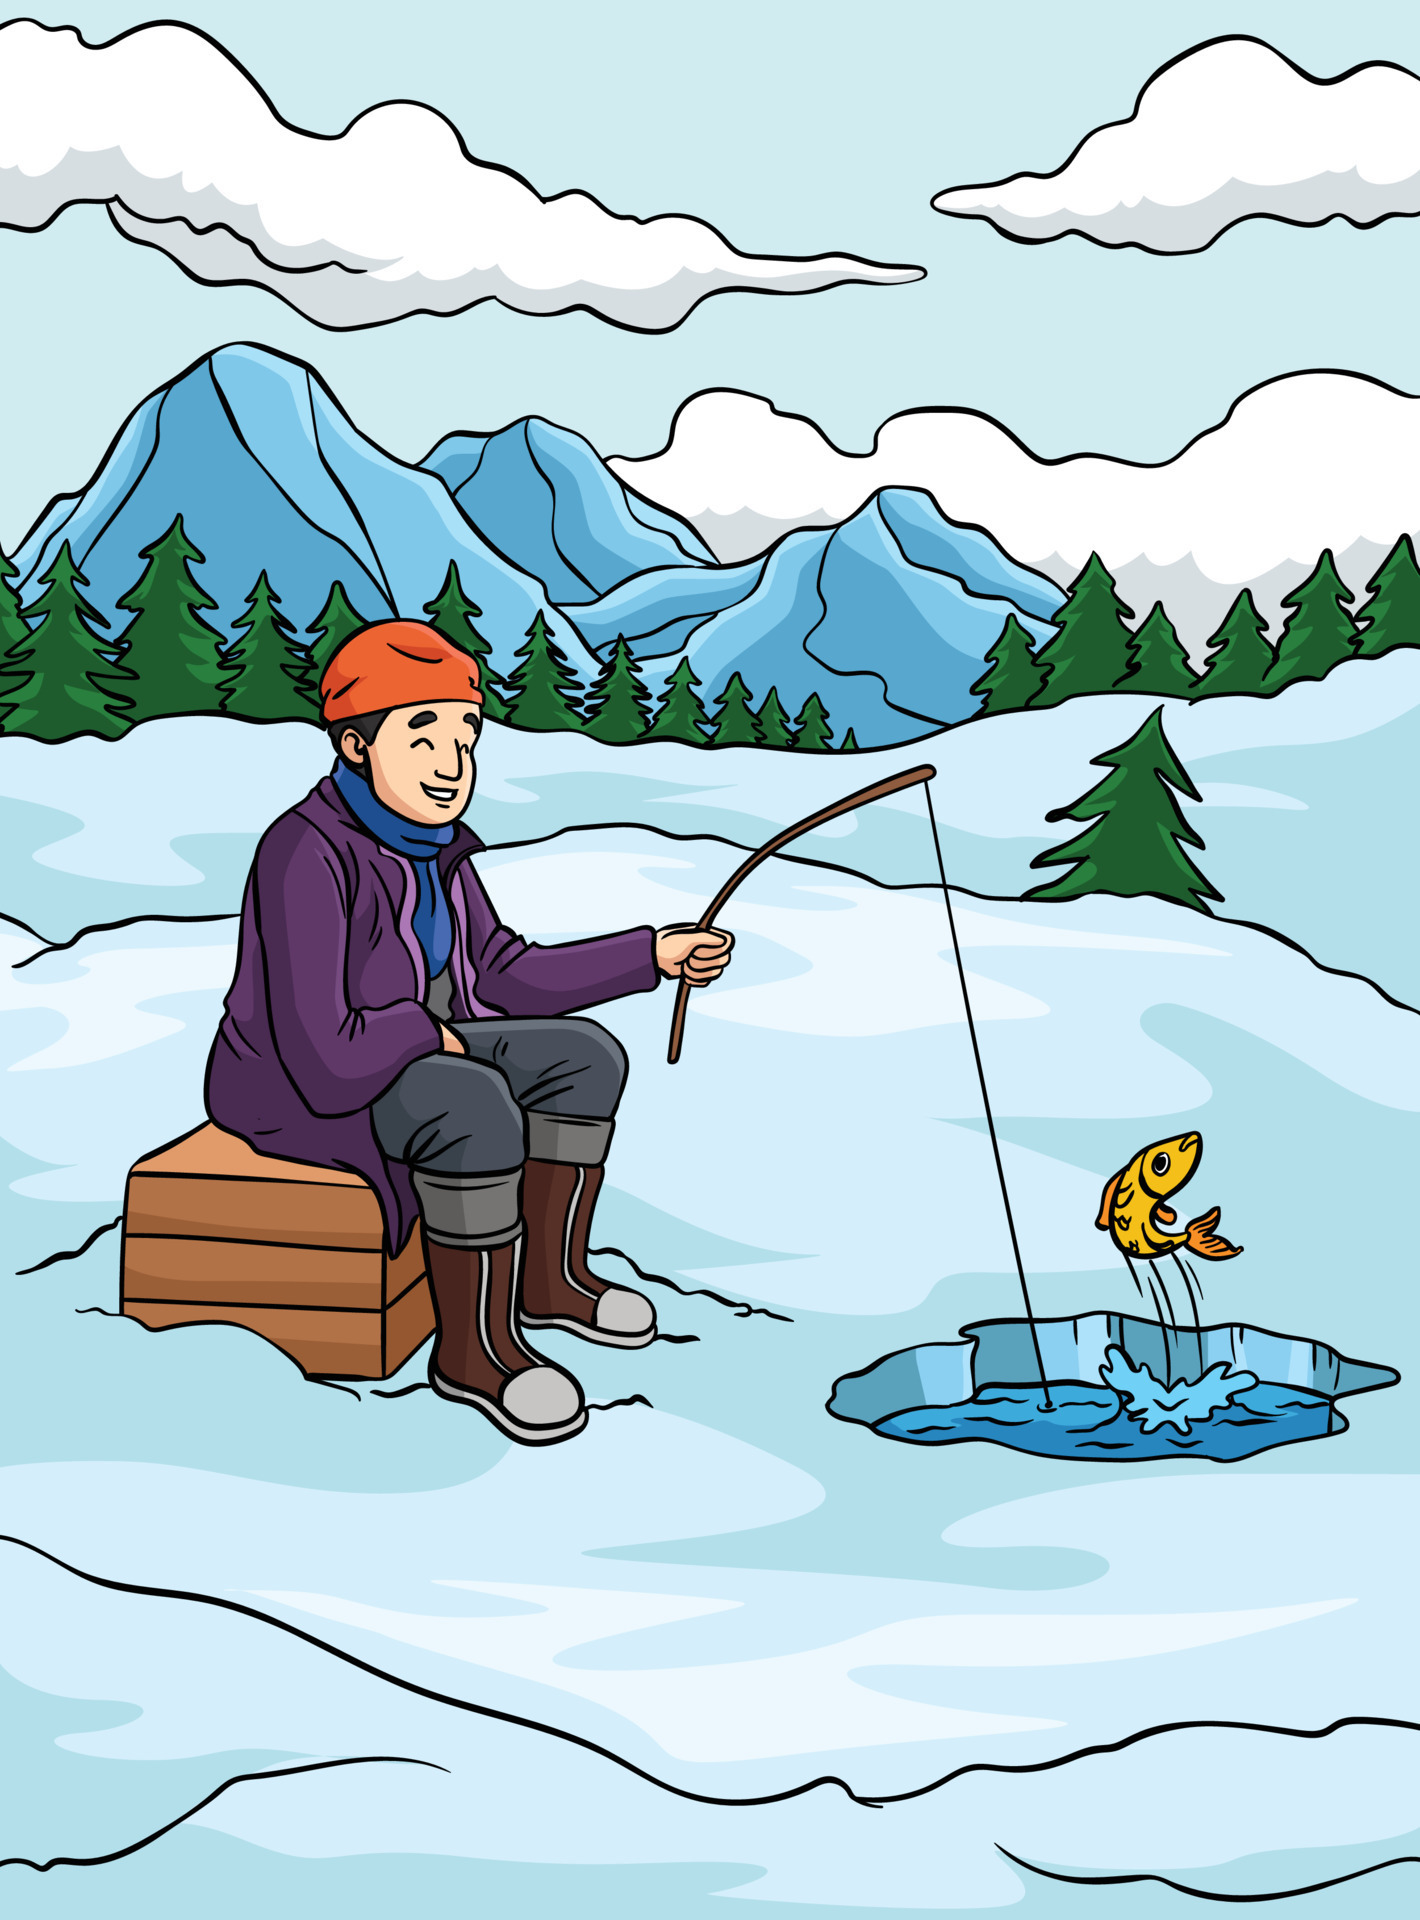 https://static.vecteezy.com/system/resources/previews/023/058/914/original/ice-fishing-colored-cartoon-illustration-free-vector.jpg